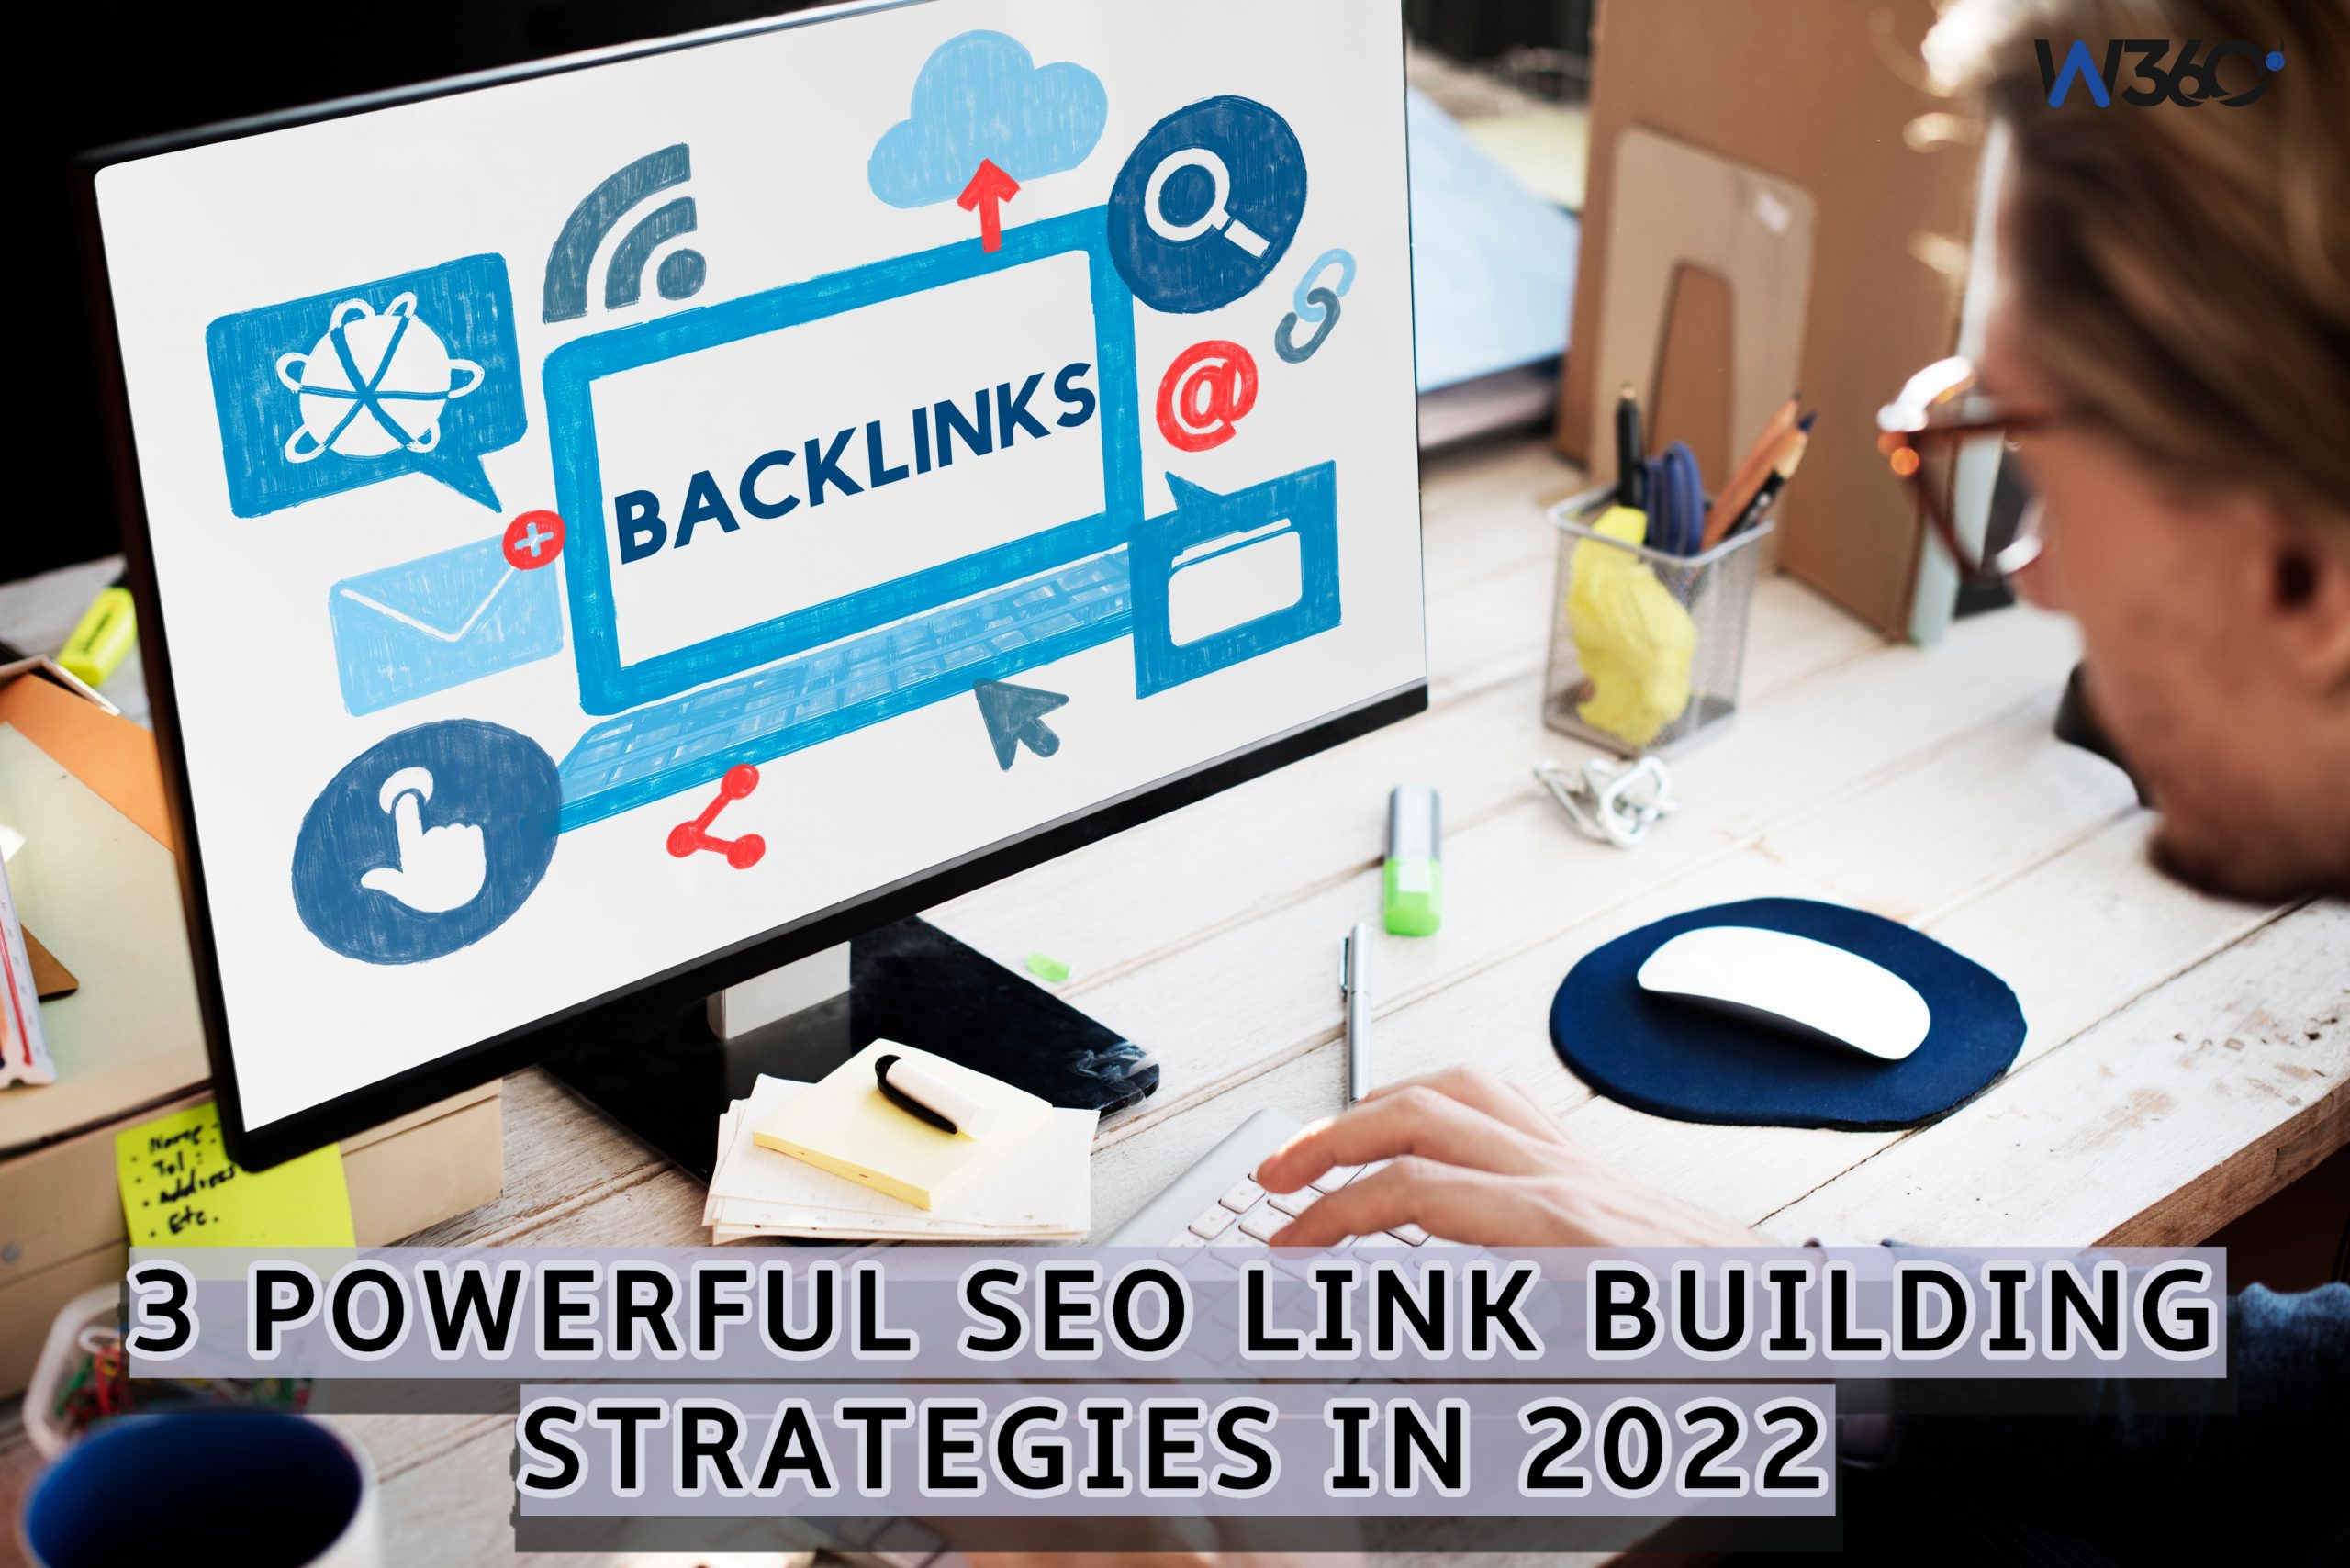 3 Powerful SEO link building strategies for 2022